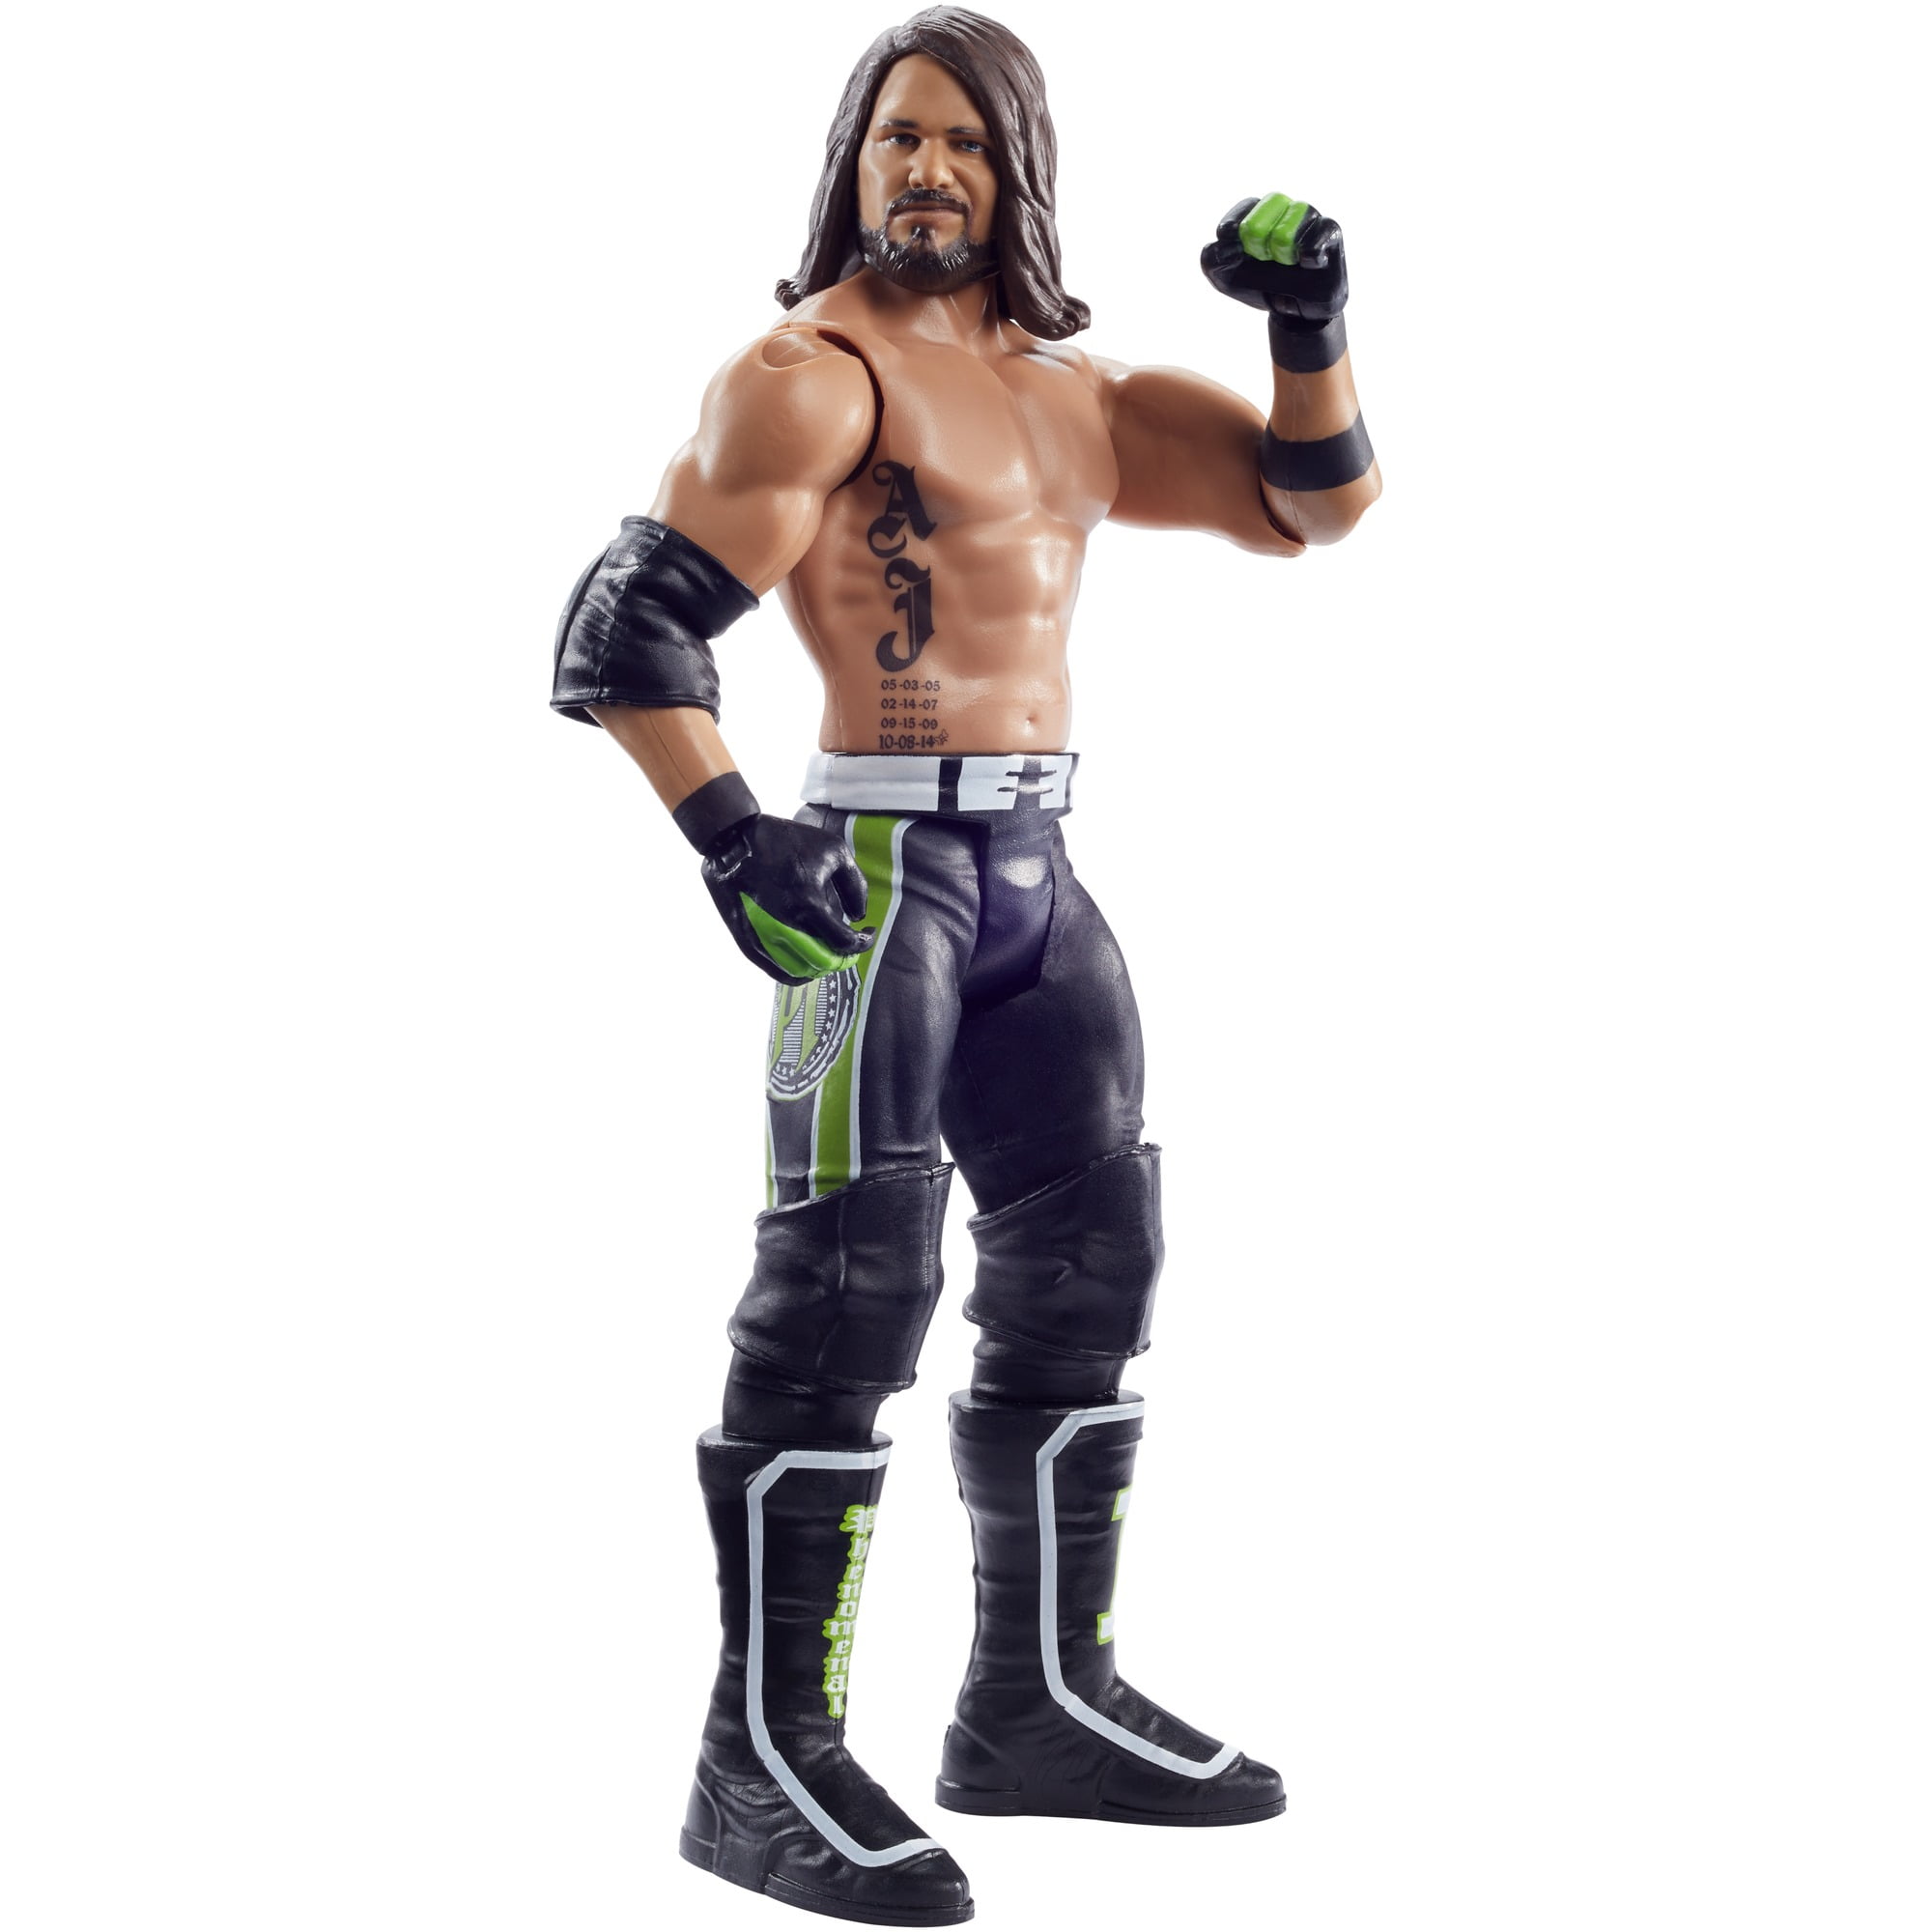 WWE WREKKIN FIGURE AJ STYLES PUNCHING ACTION WITH 2 x CHAIRS 